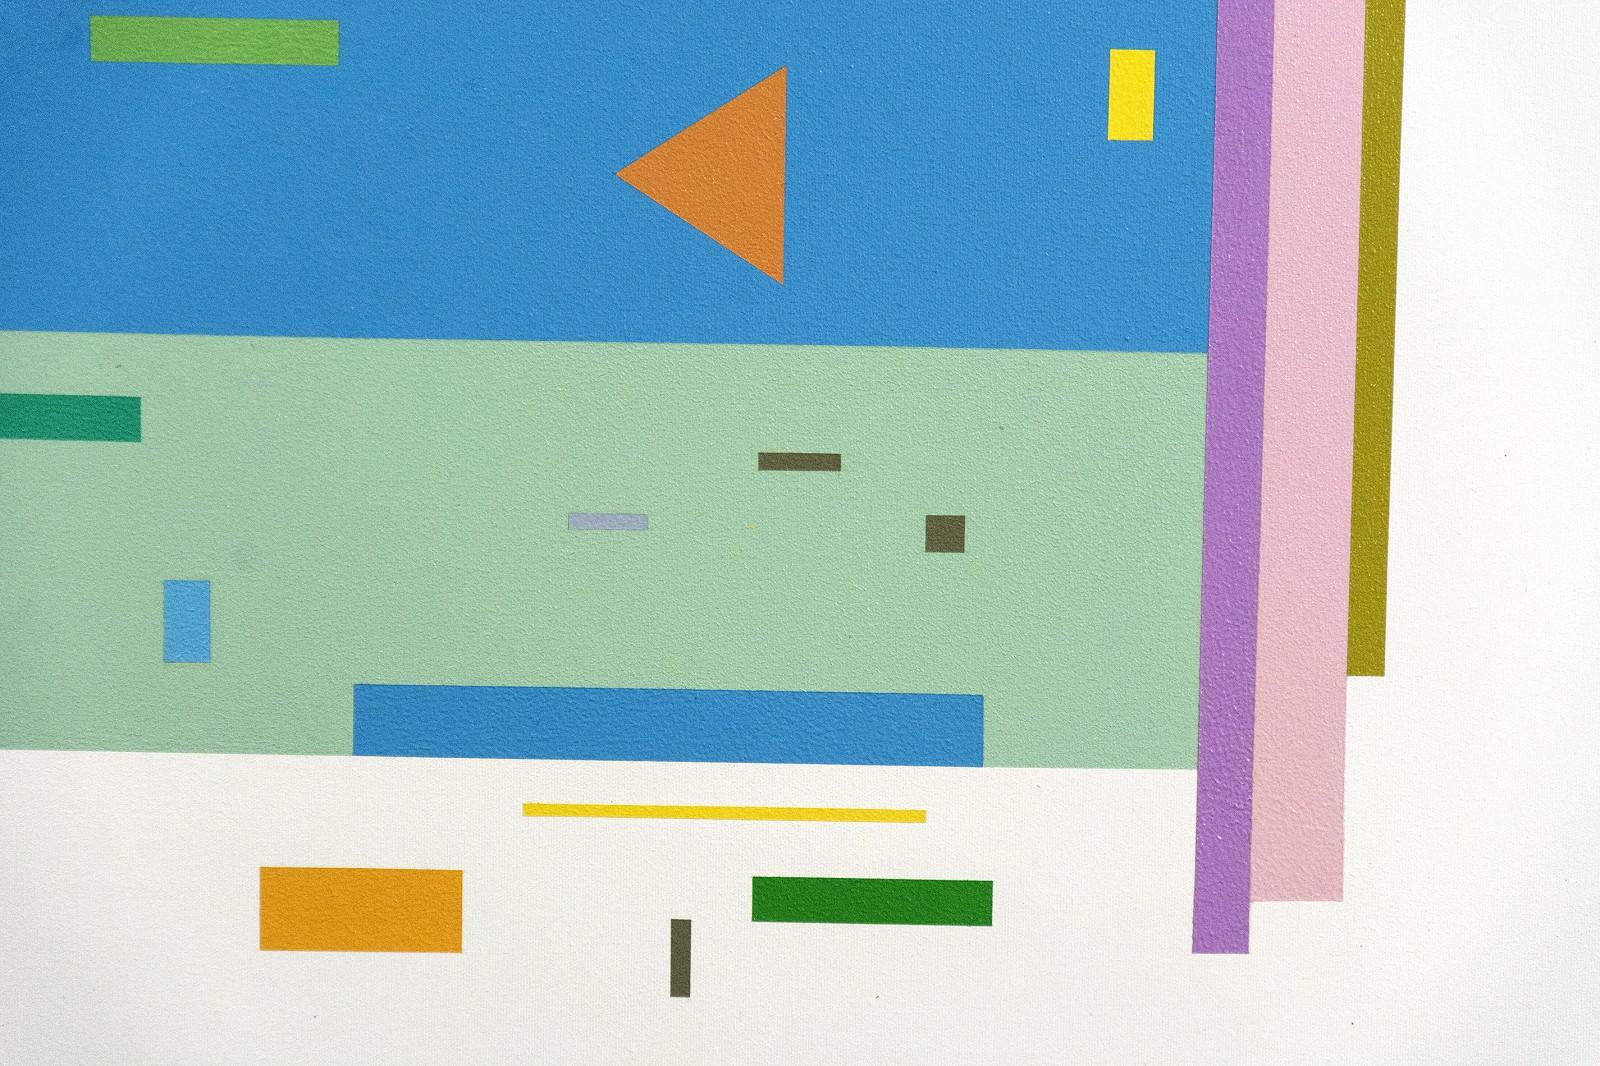 A staccato of geometric shapes in green, white and orange lights up a ground of yellow and blue in this lively composition by Burton Kramer. Like 20th-century European painter Wassily Kandinsky, renowned for his experiments with synesthesia of color